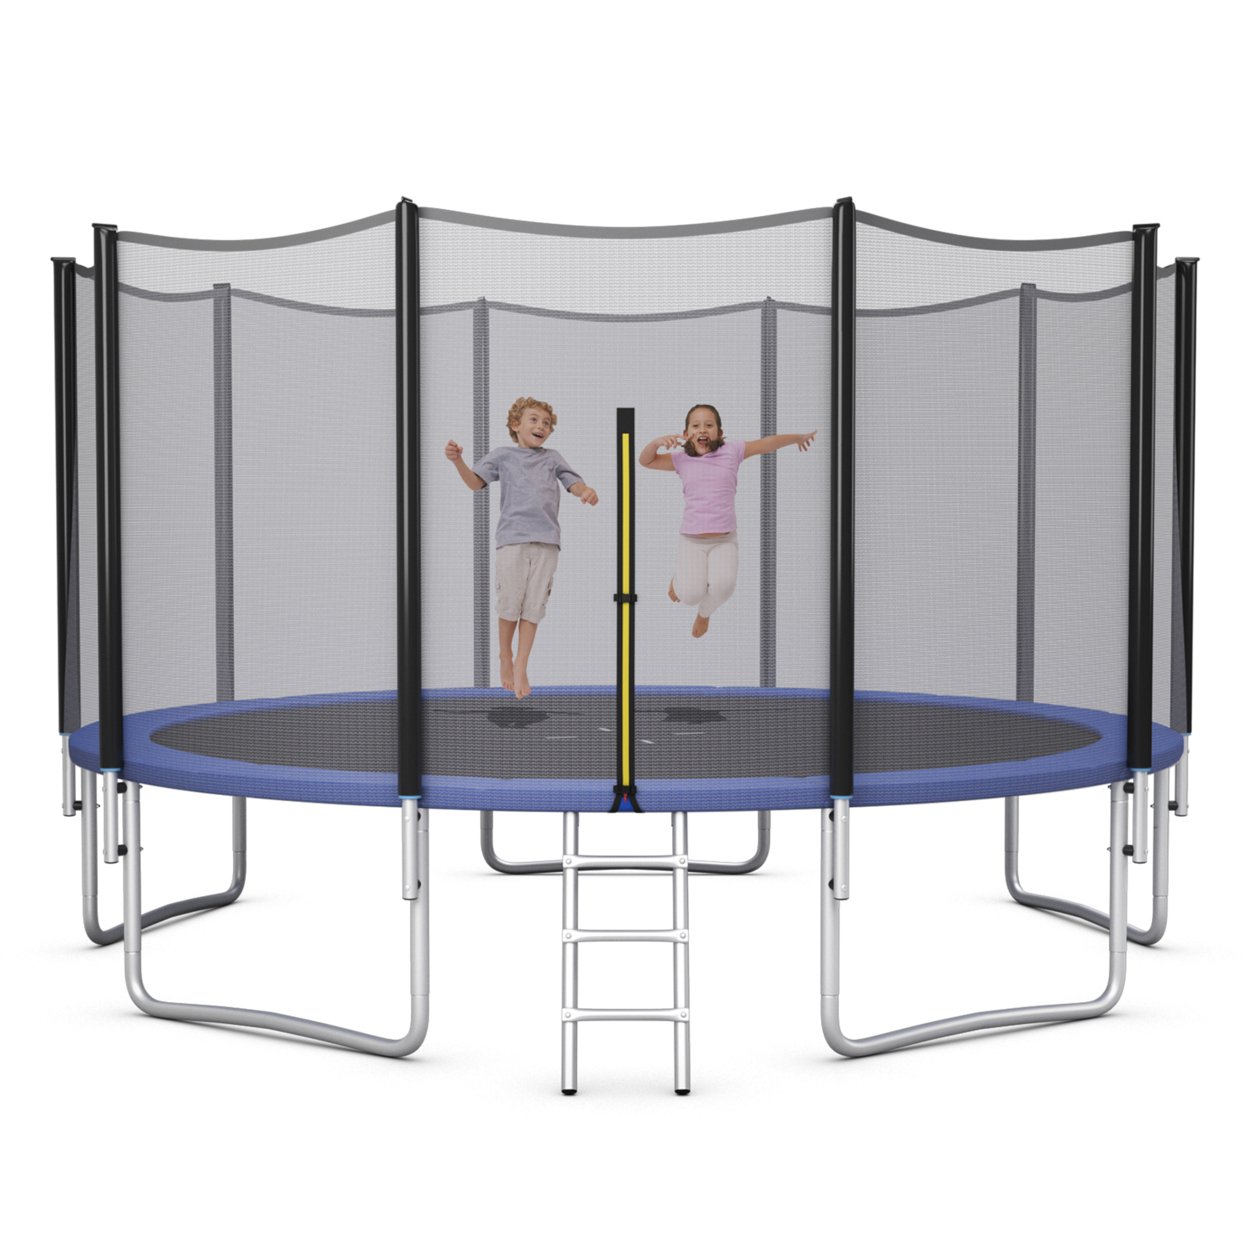 8/10/12/14/15/16 FT Outdoor Trampoline Bounce Combo W/Safety Closure Net Ladder - Black, 15 Ft